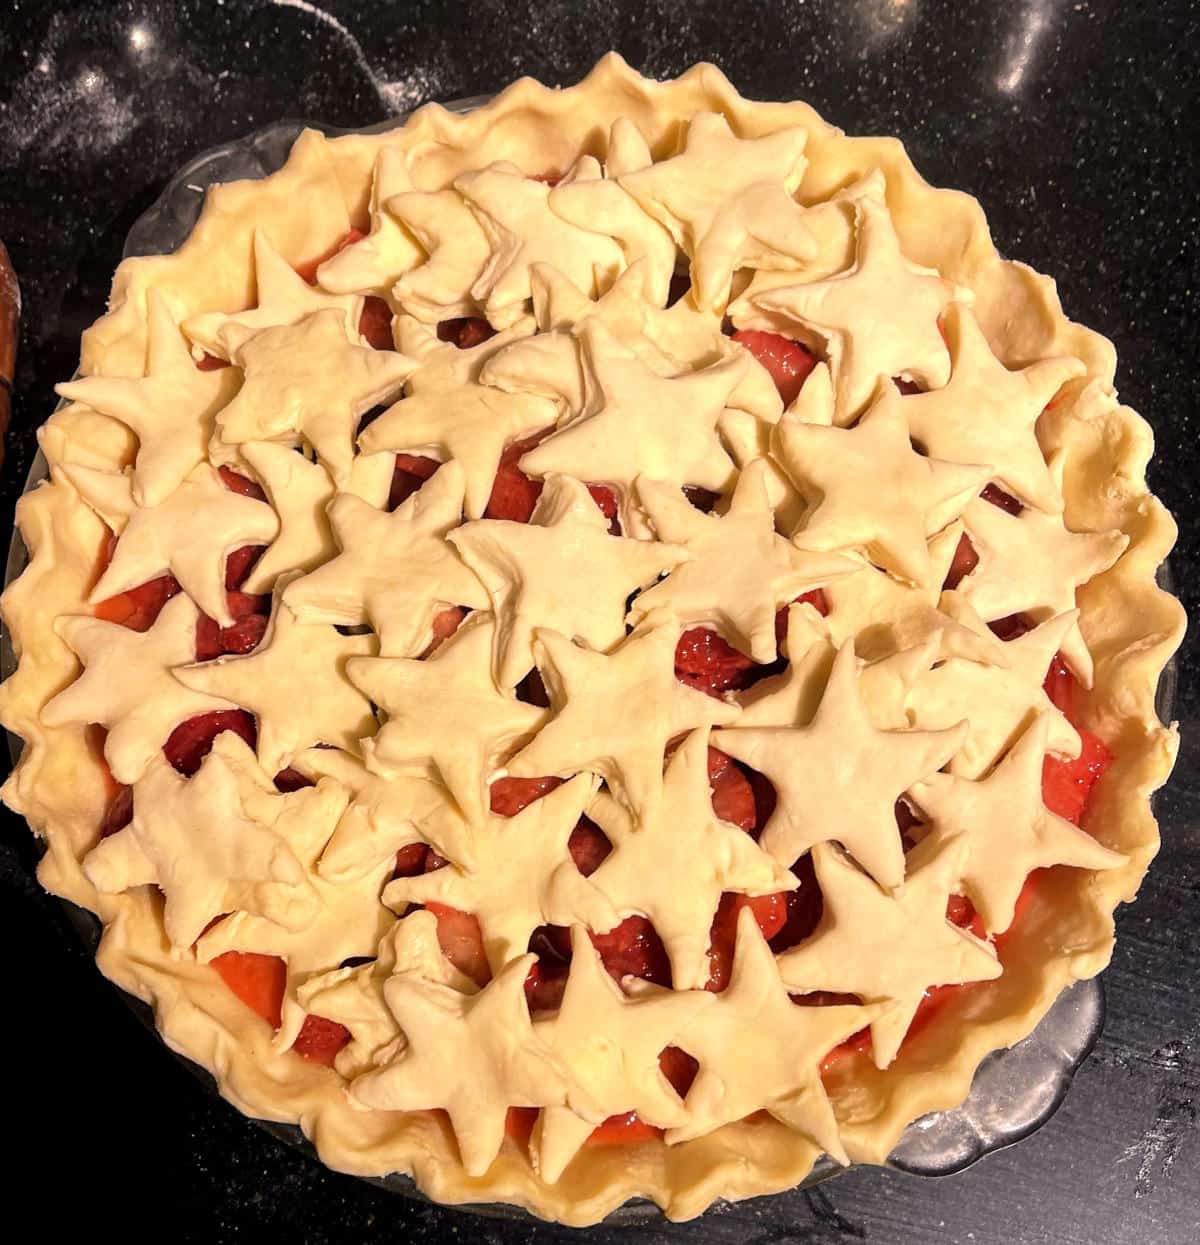 Stars arranged on top of the pie.